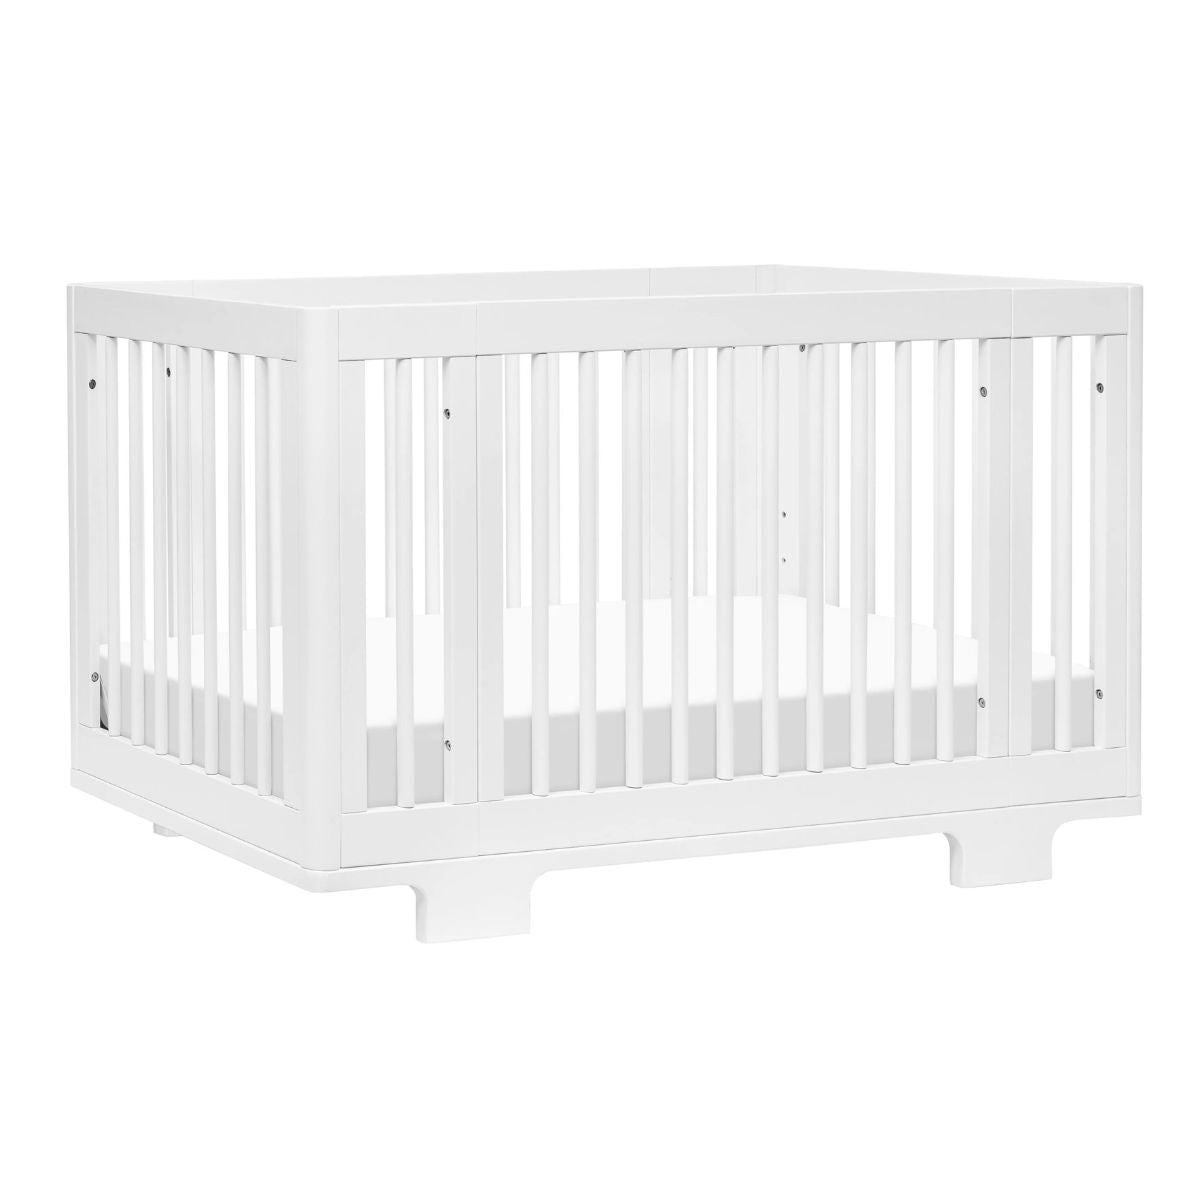 Babyletto Yuzu 8-in-1 Convertible Crib with All-Stages Conversion Kits - White